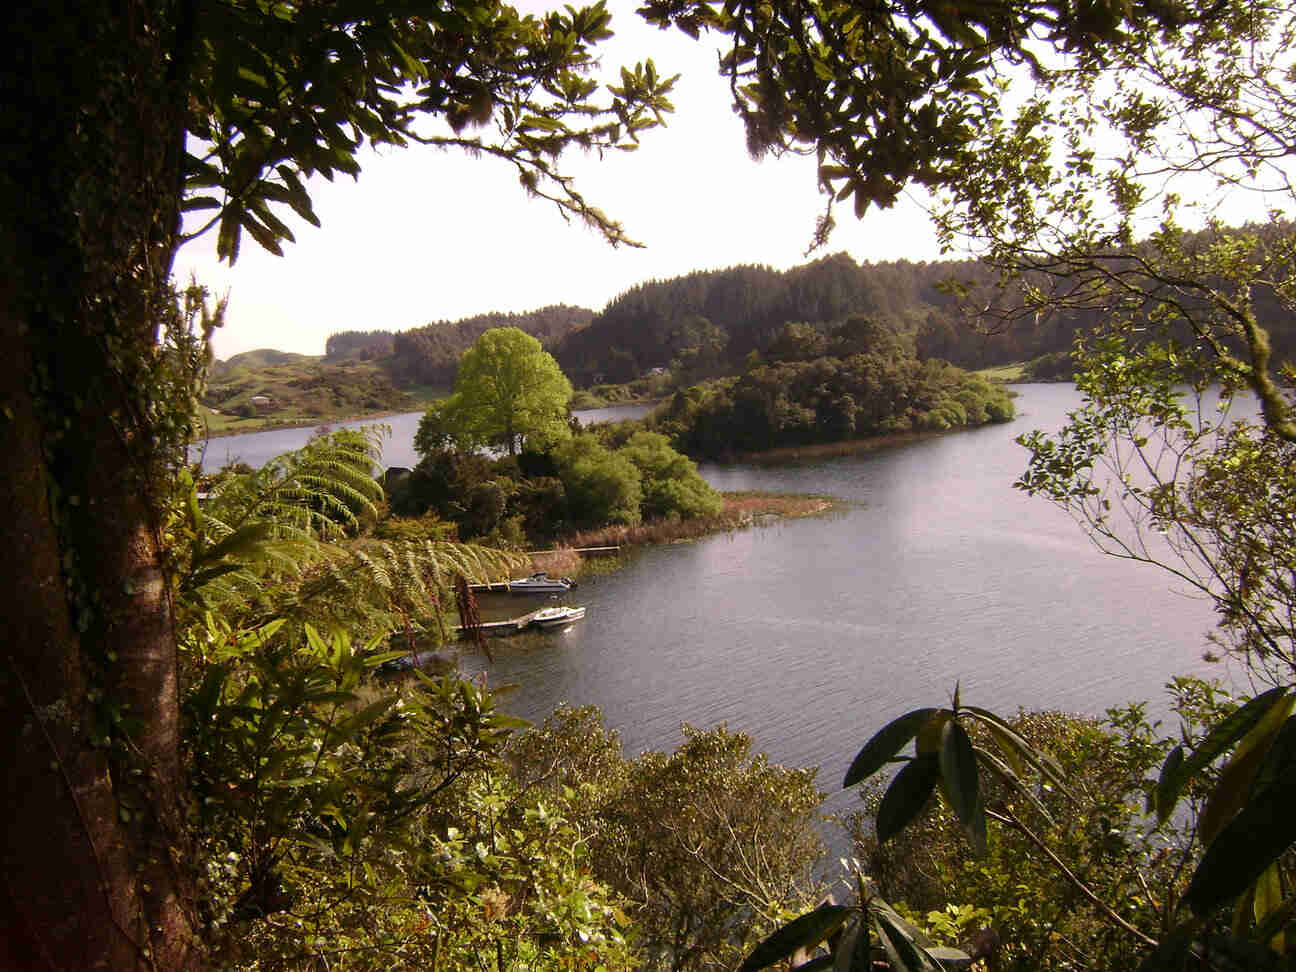 Overlook view of a bay on a lake, with small islands, and forest all around